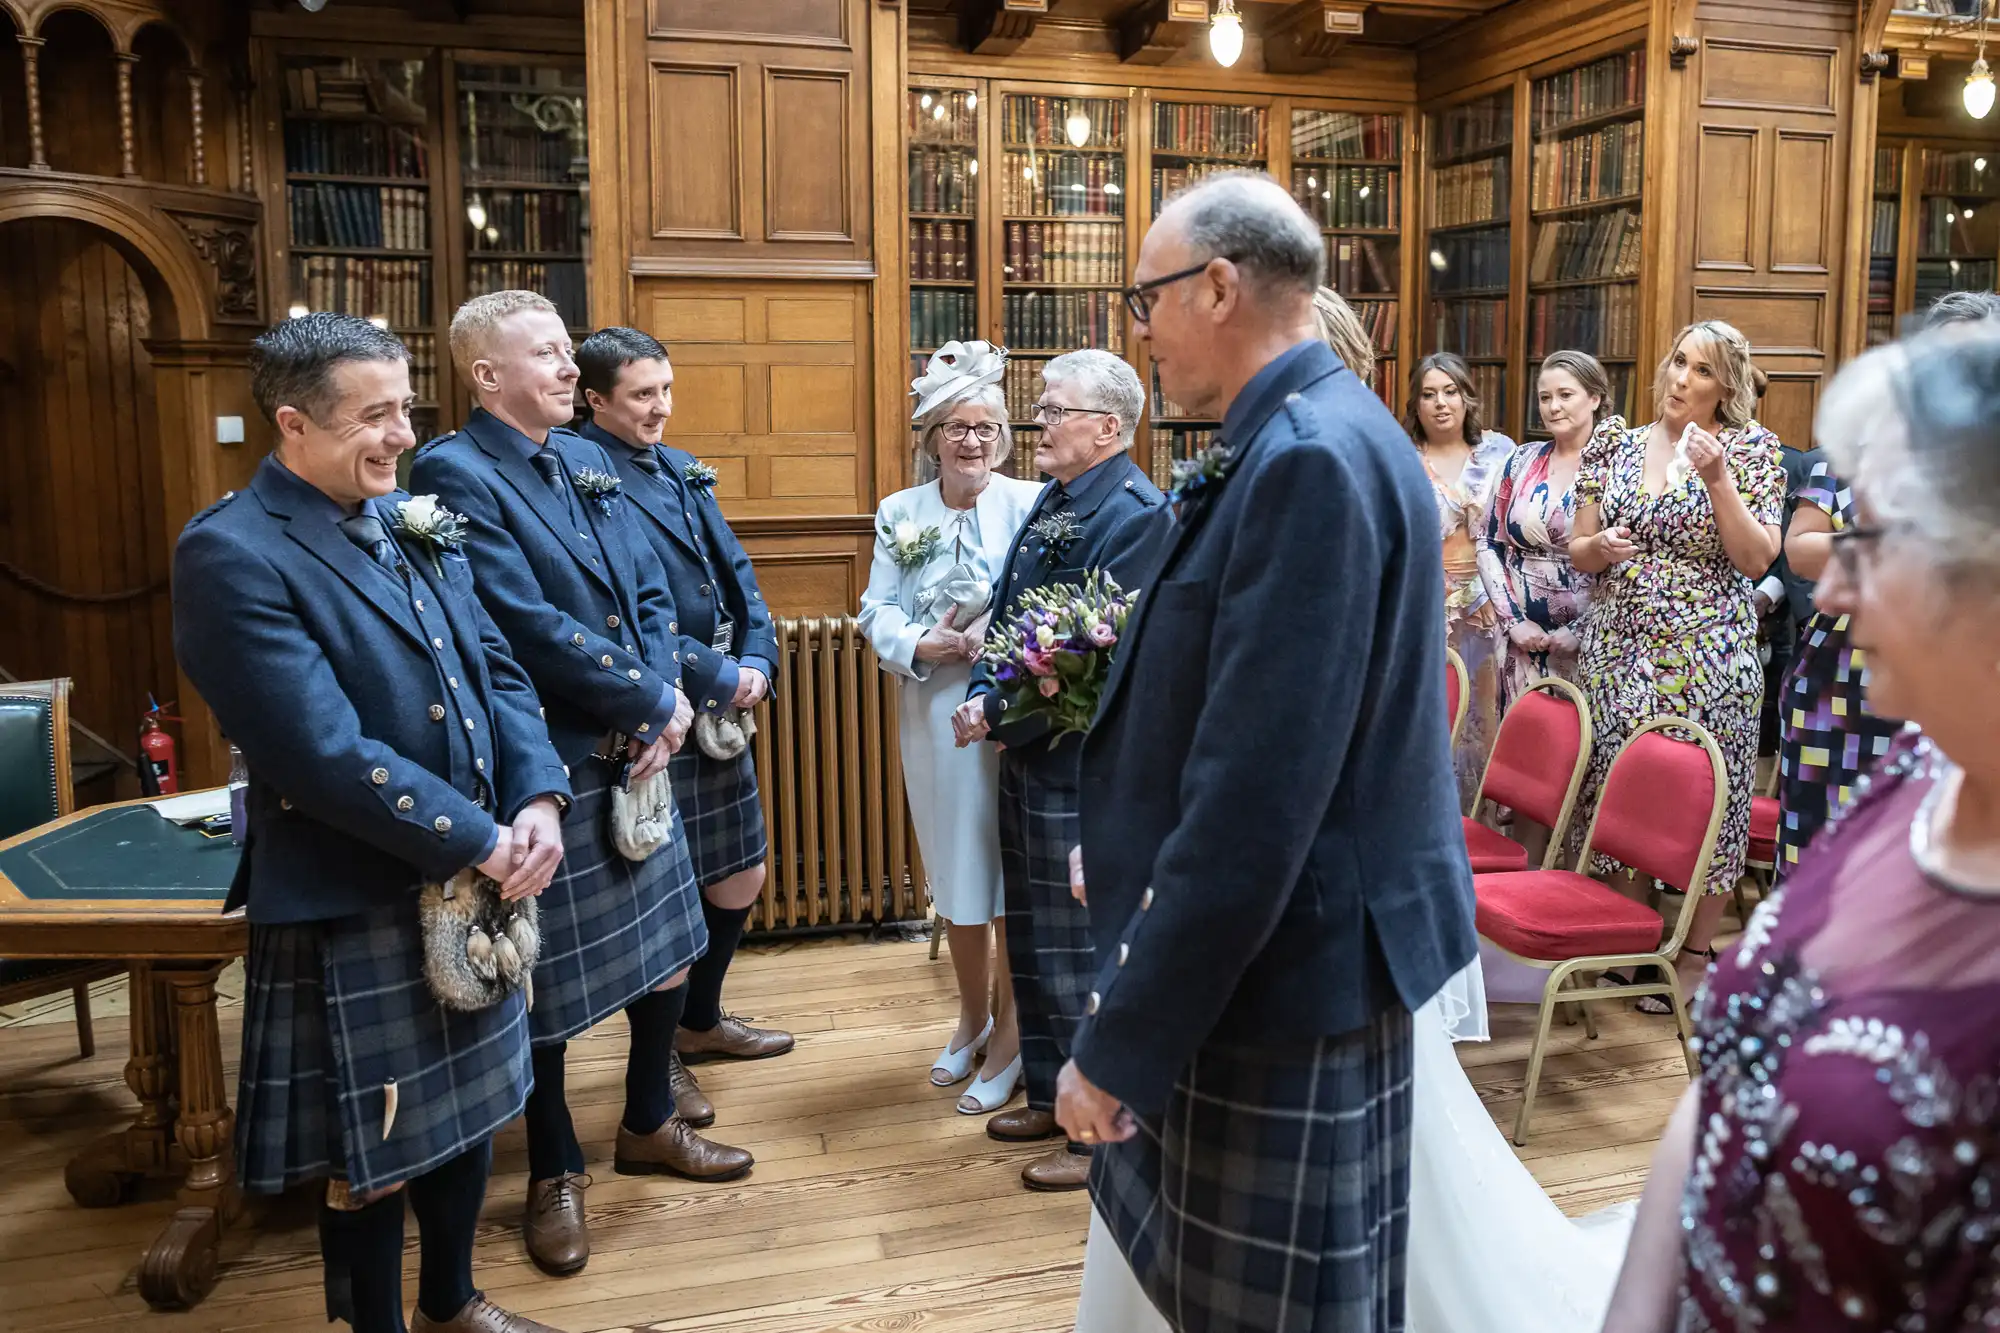 A wedding procession in a wood-paneled room: the groom, in a kilt, stands with groomsmen, waiting as the bride, carrying a bouquet, is escorted down the aisle by an elderly man. Seated guests look on.